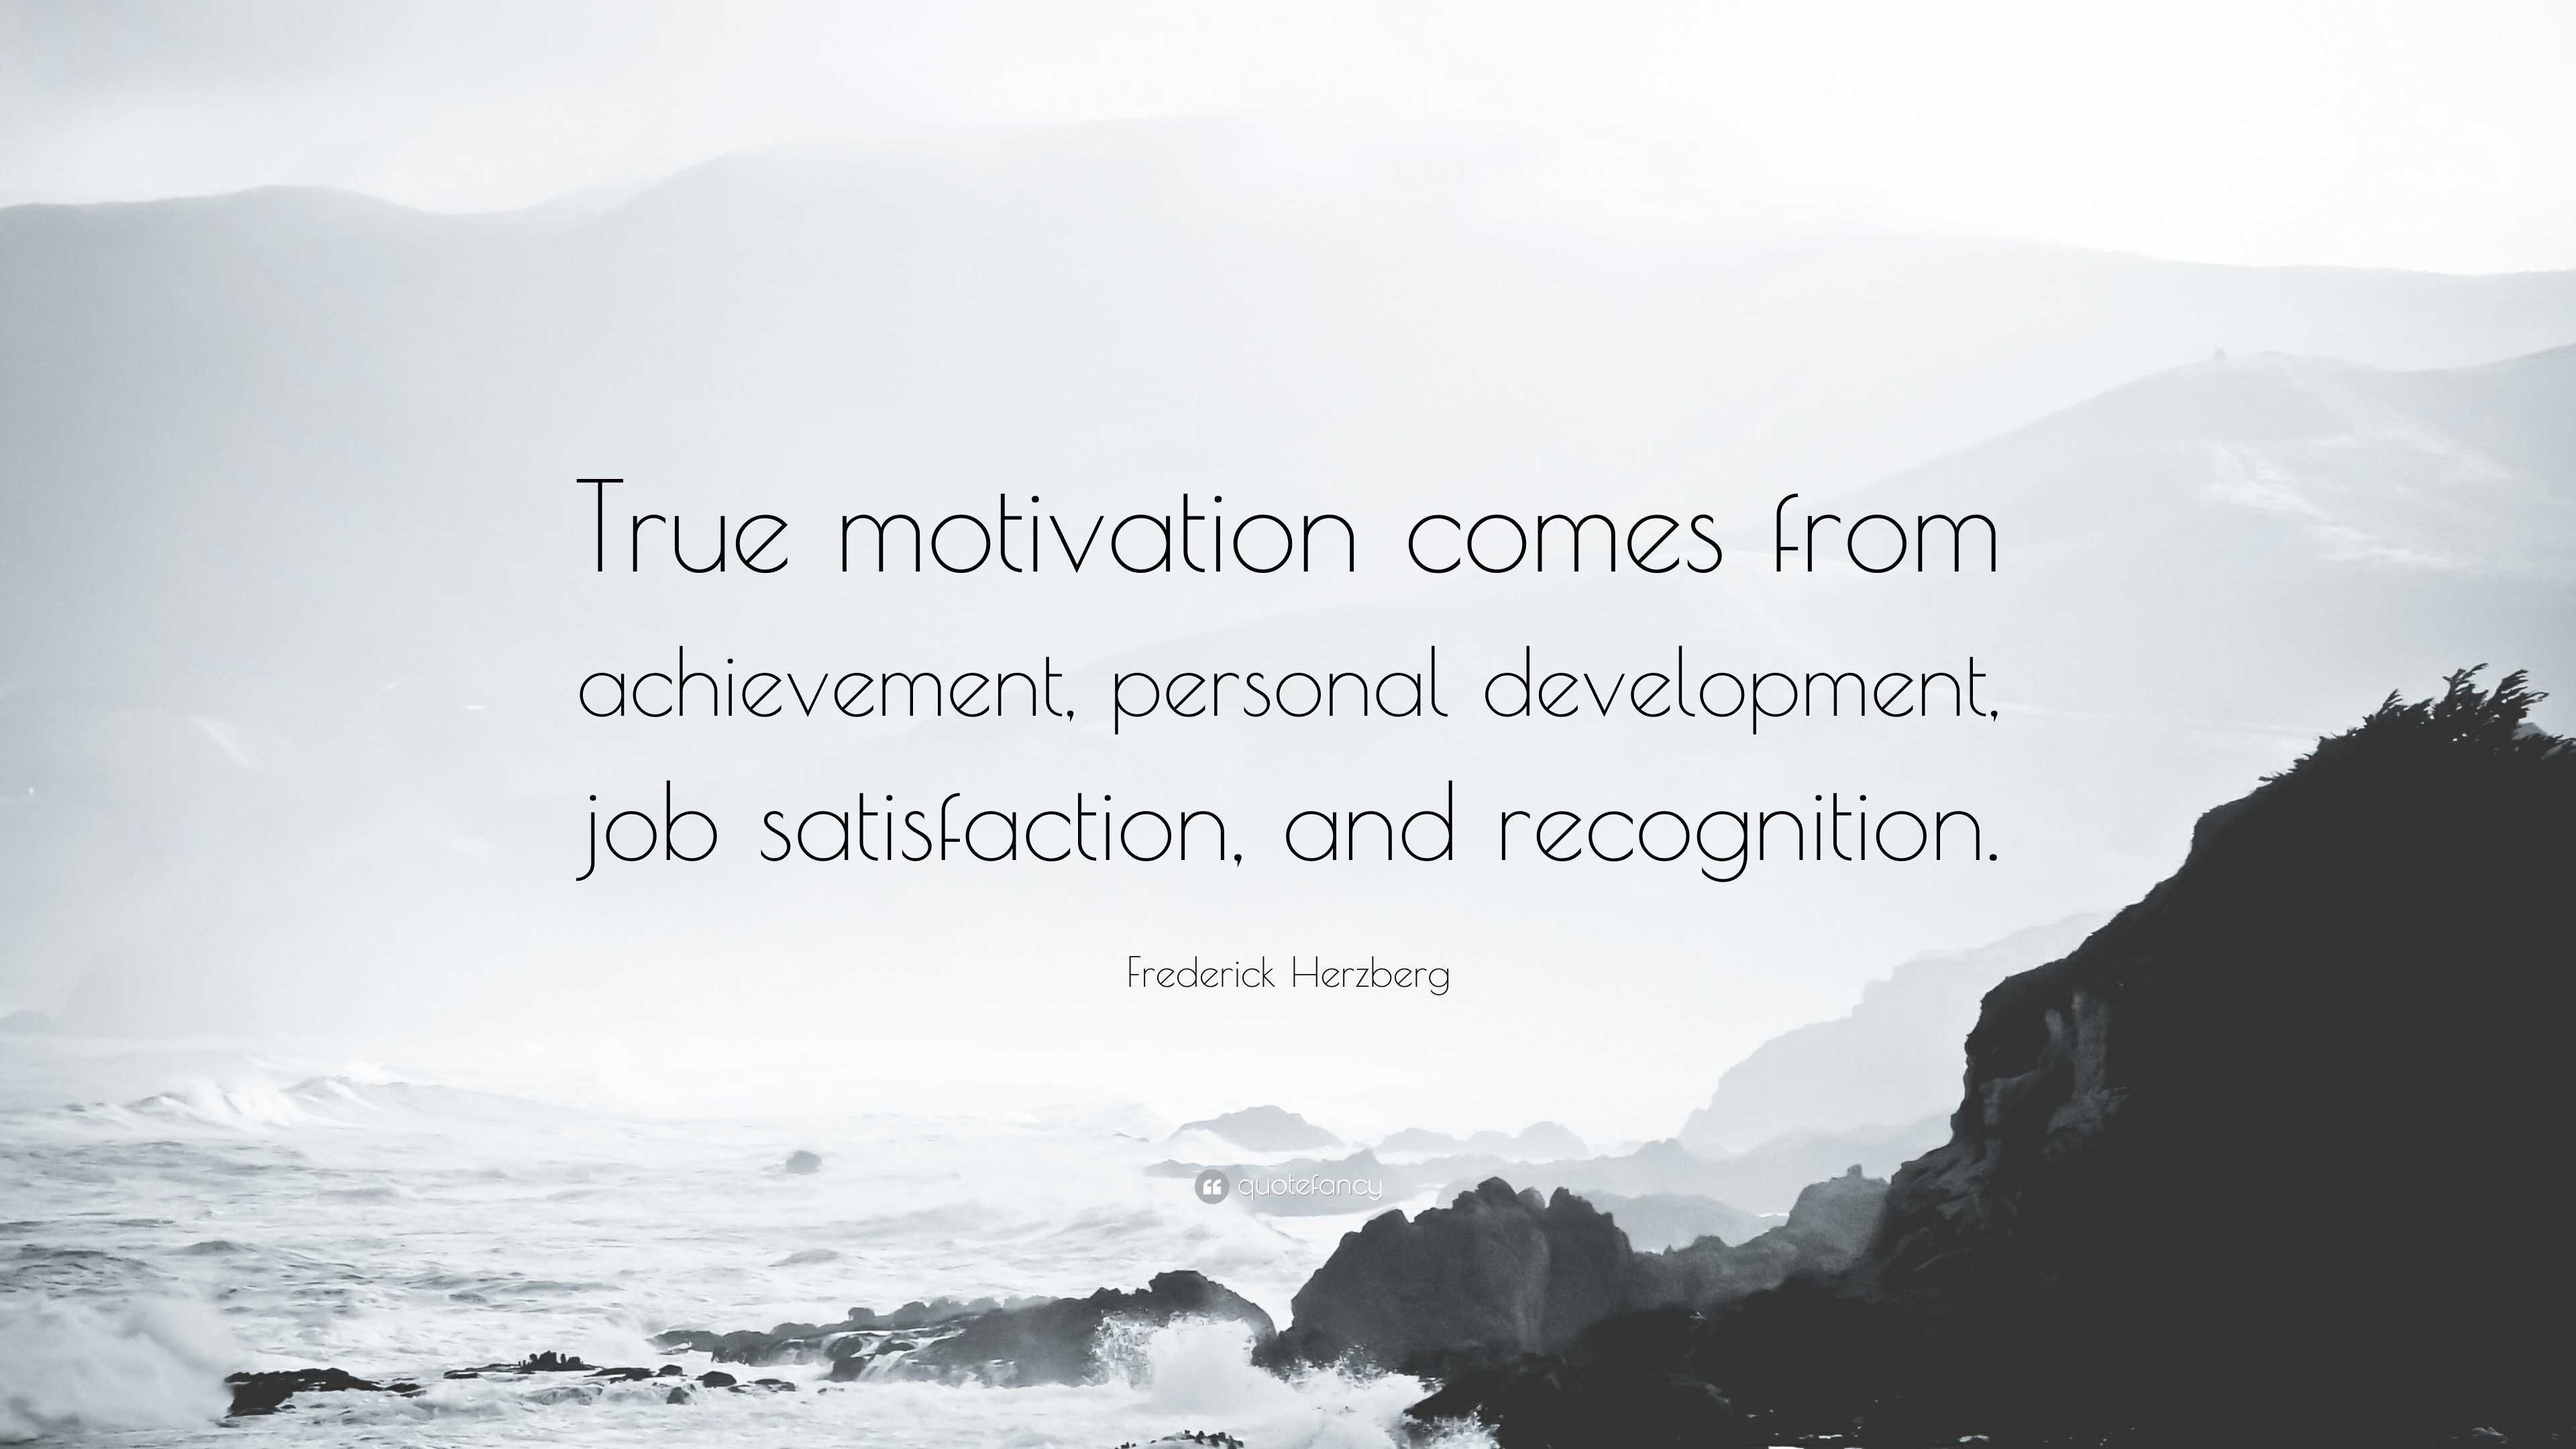 What Makes A True Motivation Comes From